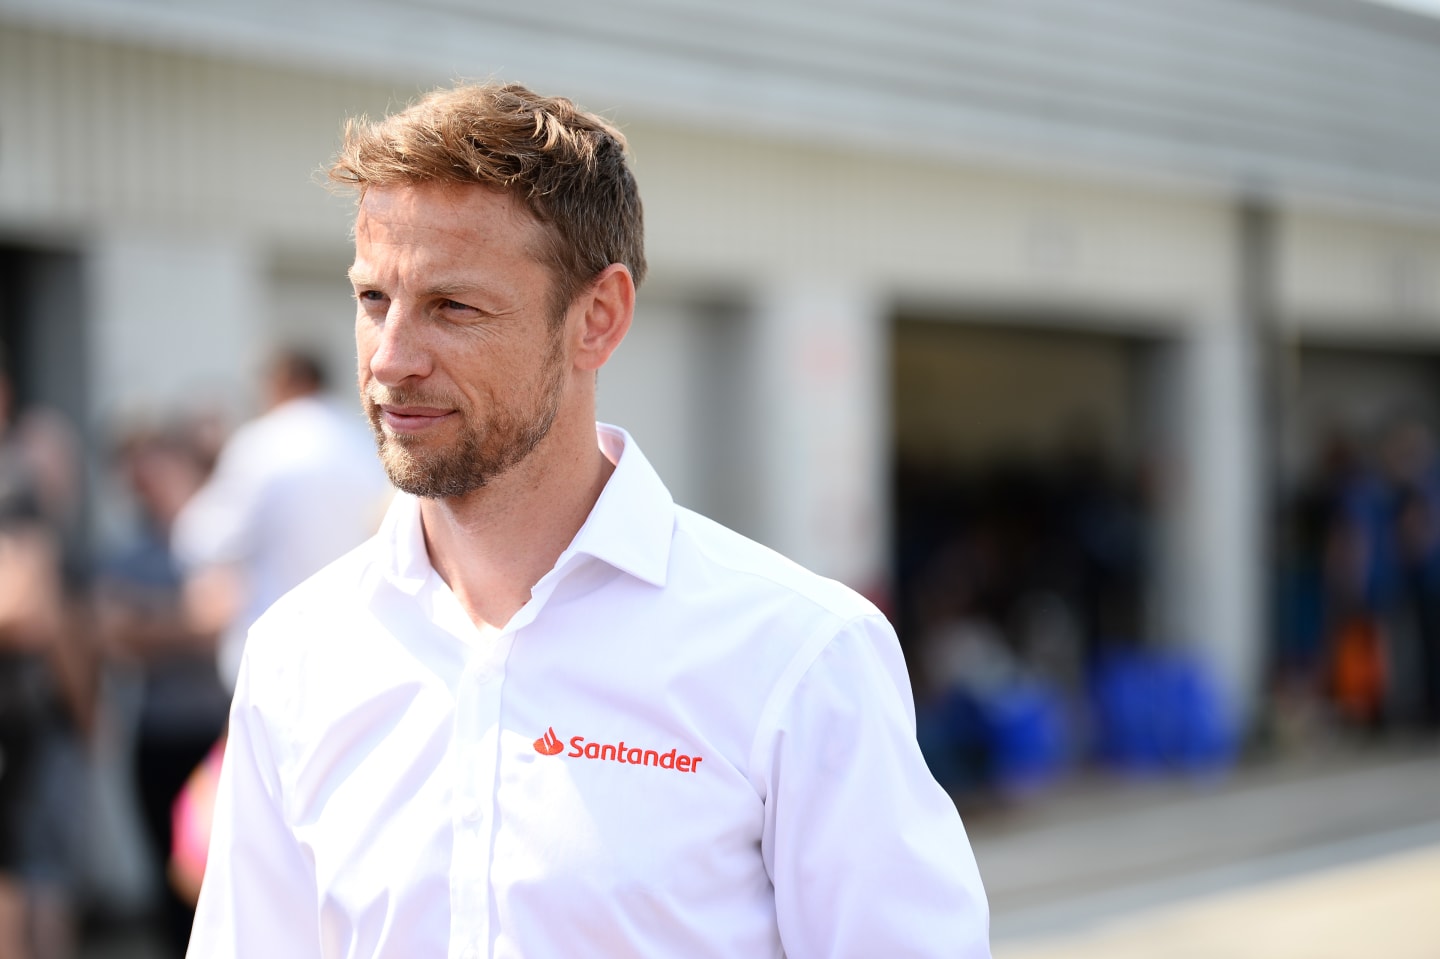 NORTHAMPTON, ENGLAND - JULY 14:  Santander Ambassador Jenson Button is pictured during the 20th